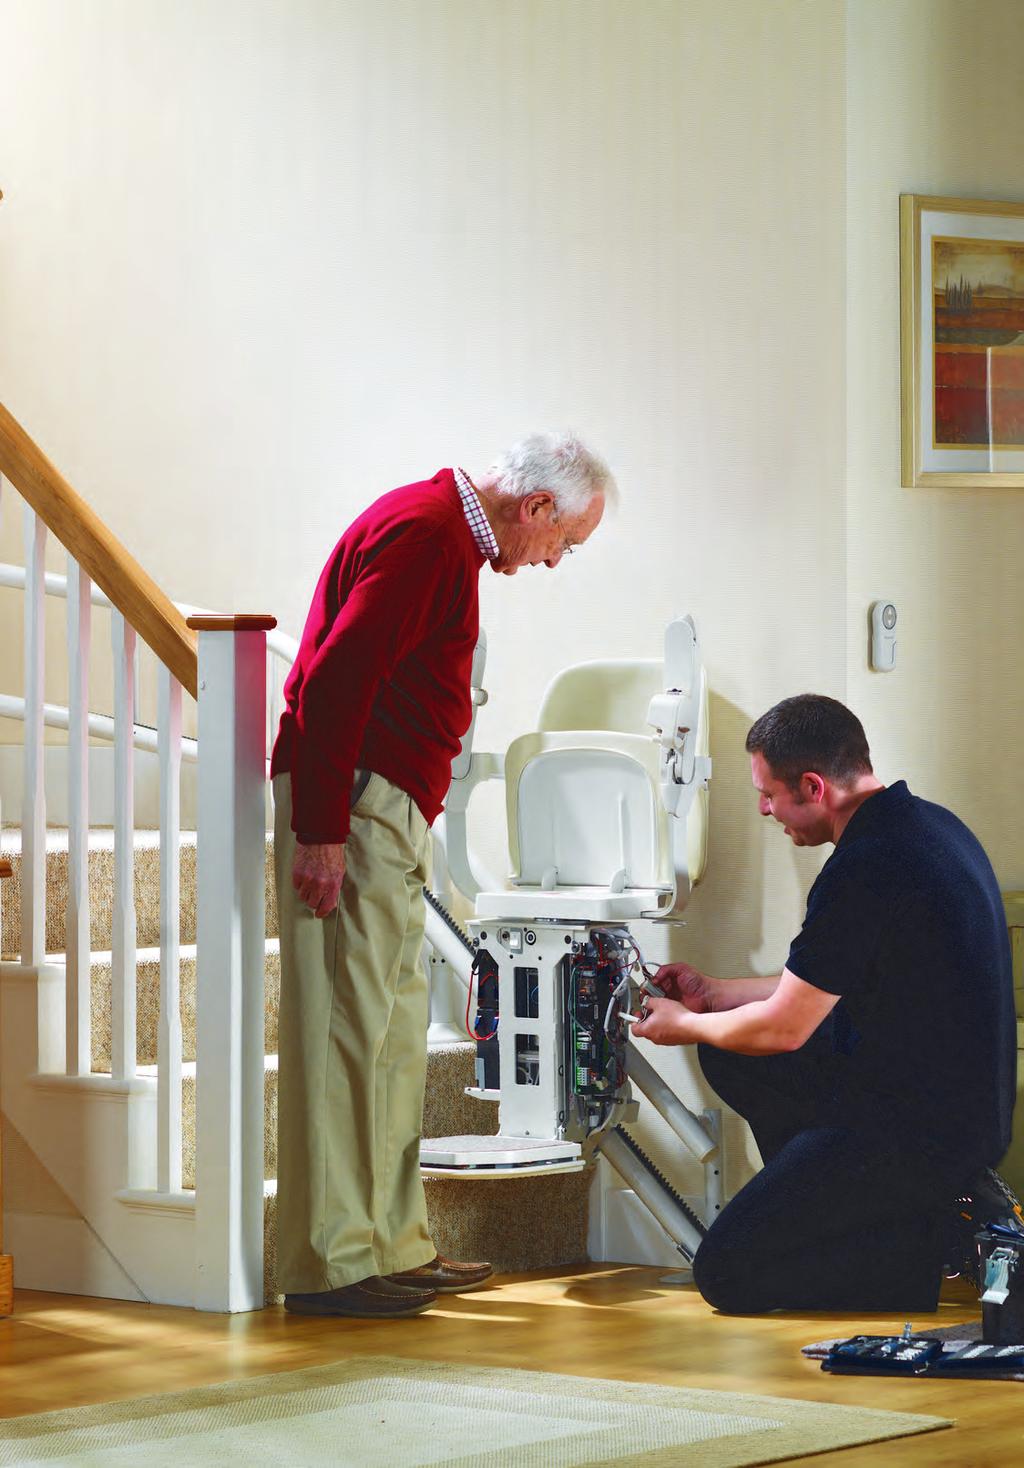 5 3 The two men who installed the stairlift worked quickly and efficiently. They explained and demonstrated how to use the lift thoroughly.